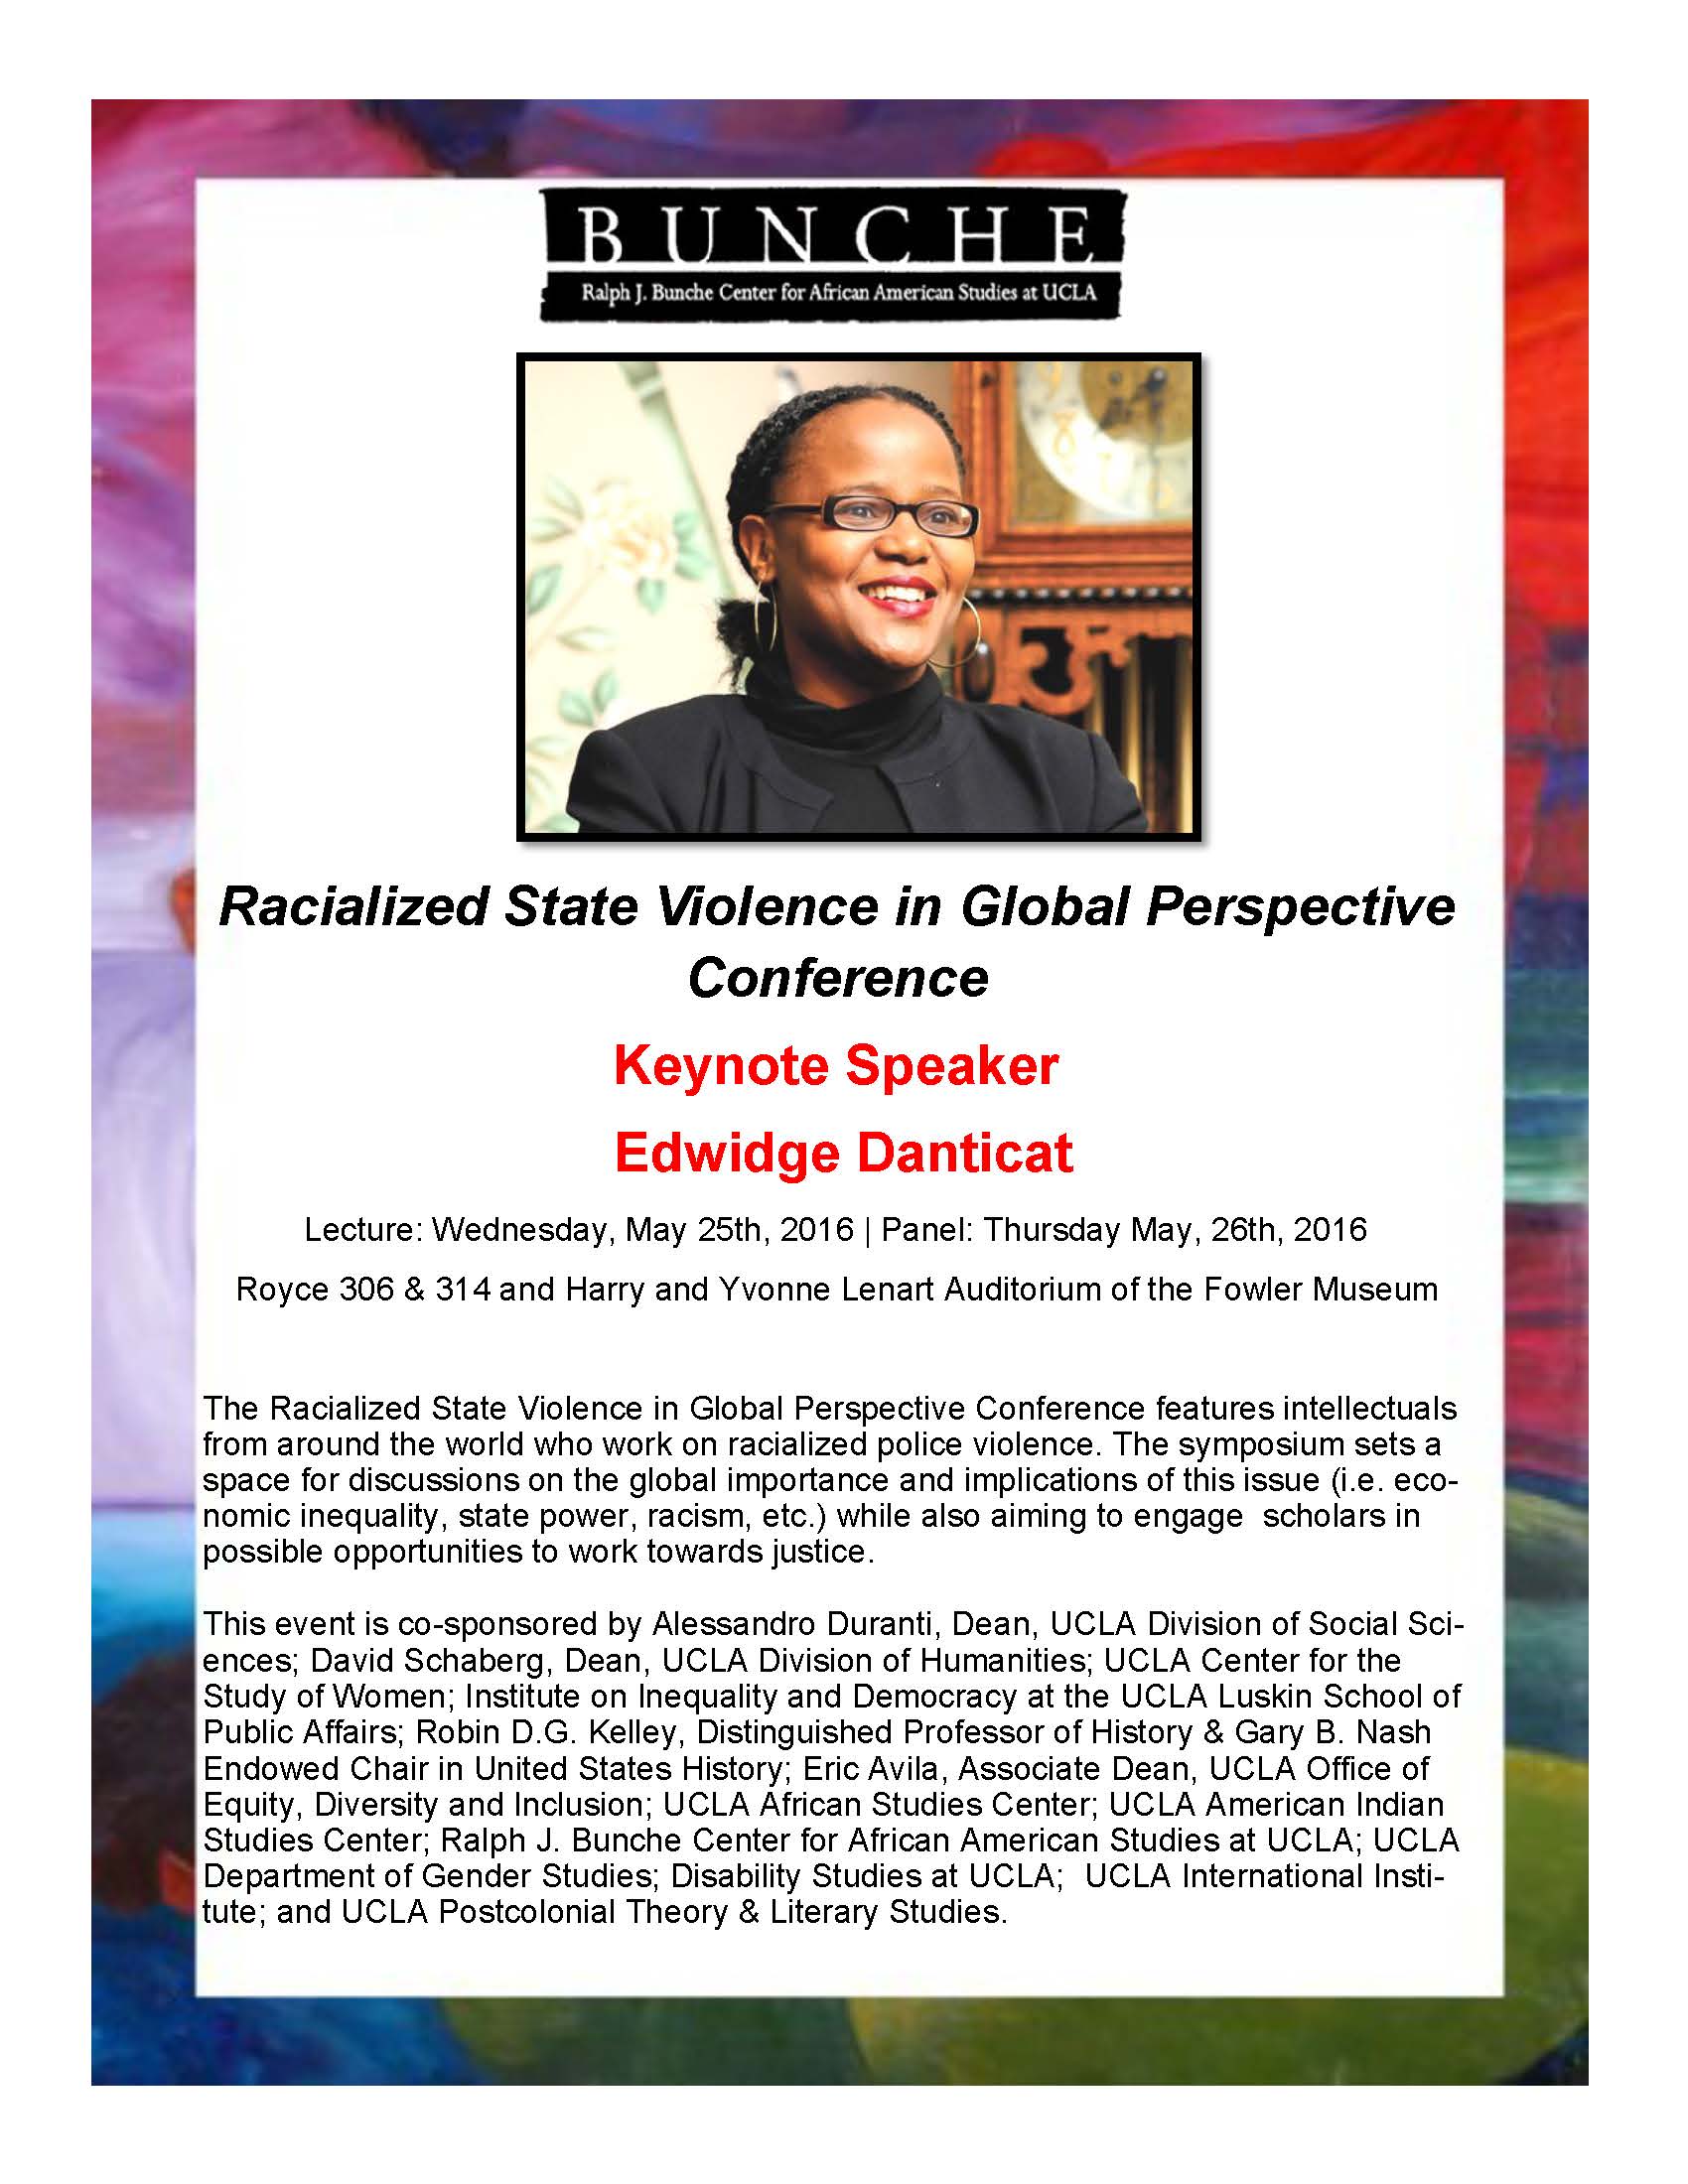 5-25-16 Racialized State Violence Conf